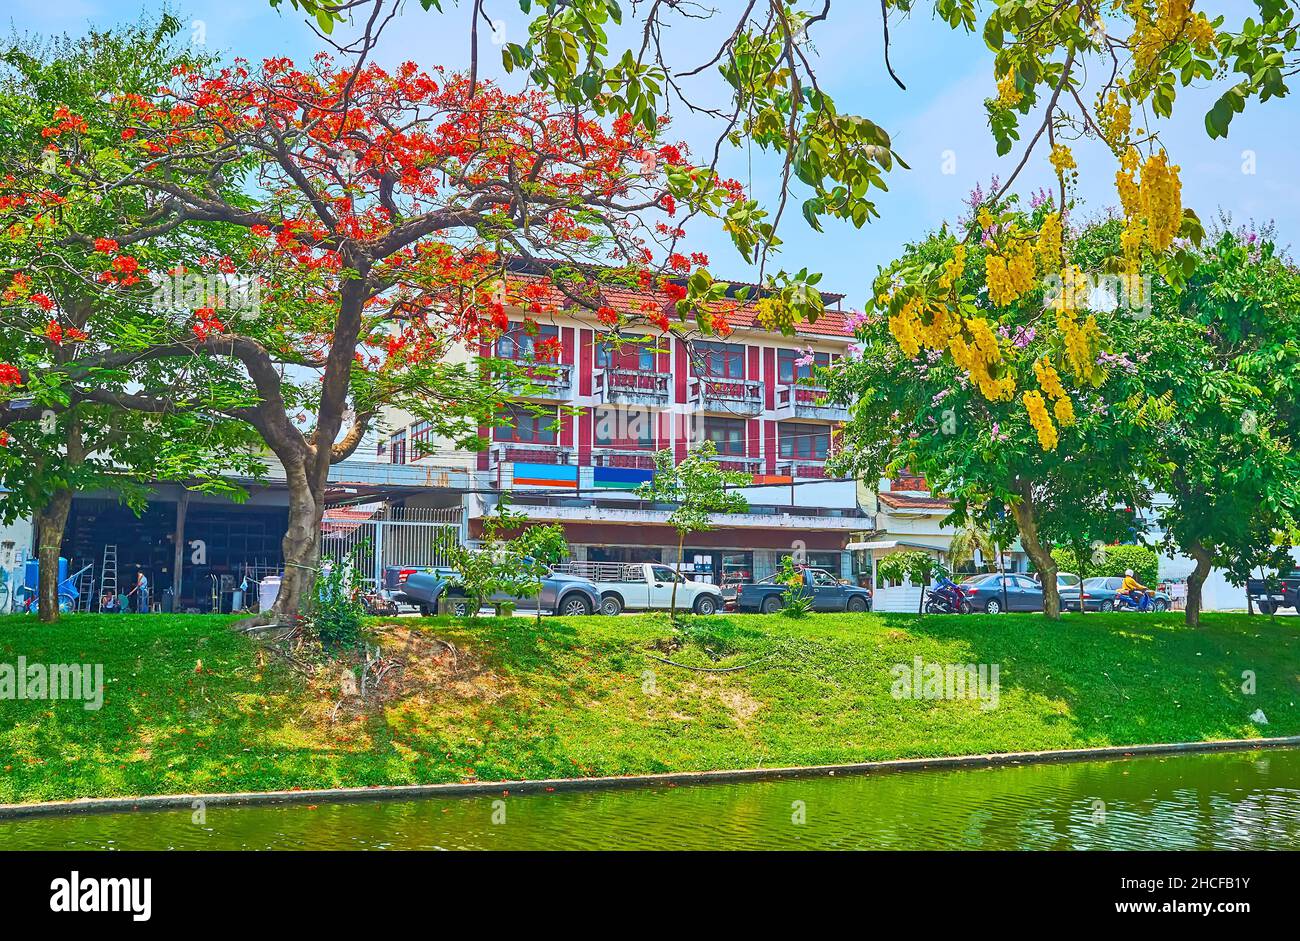 The bright orange flowers of the flame tree and the yellow flowers of caragana tree, growing on the bank of the canal of Old City Moat, Chiang Mai, Th Stock Photo